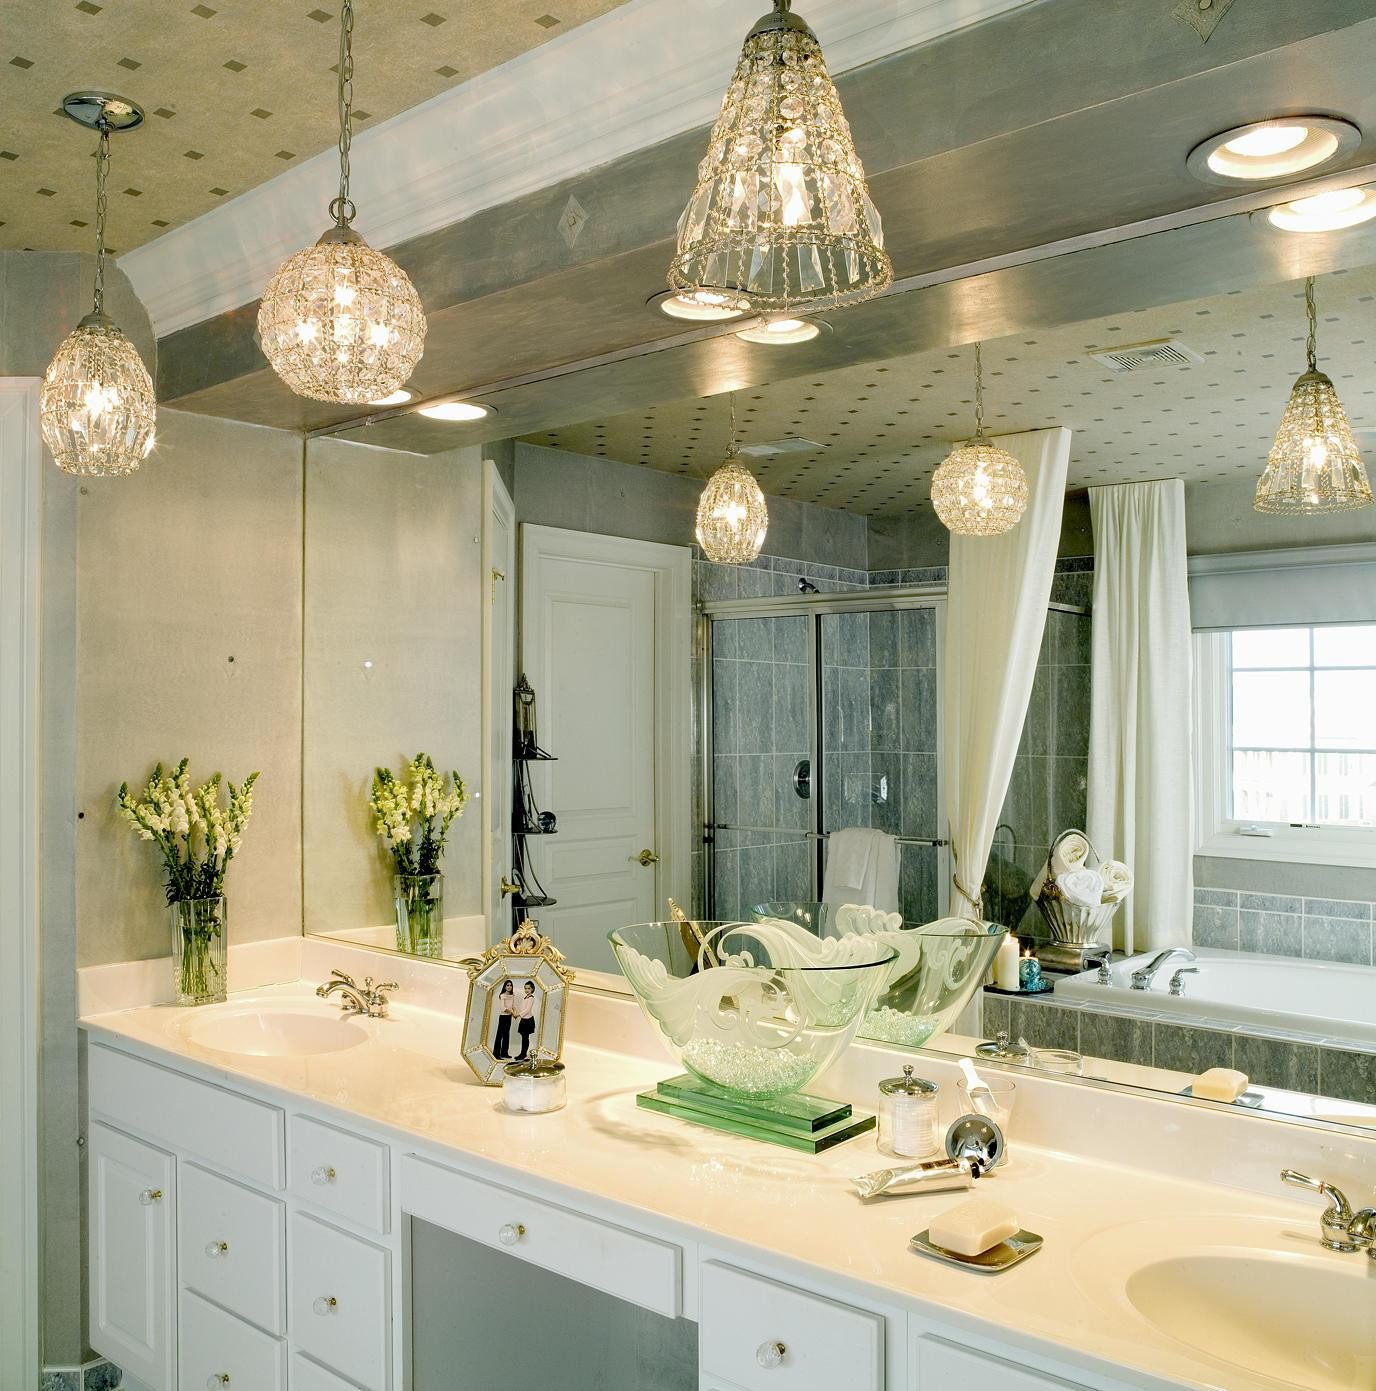 Cool Bathroom Light Fixtures
 Bathroom Pendant Lighting Fixtures with a Controllable